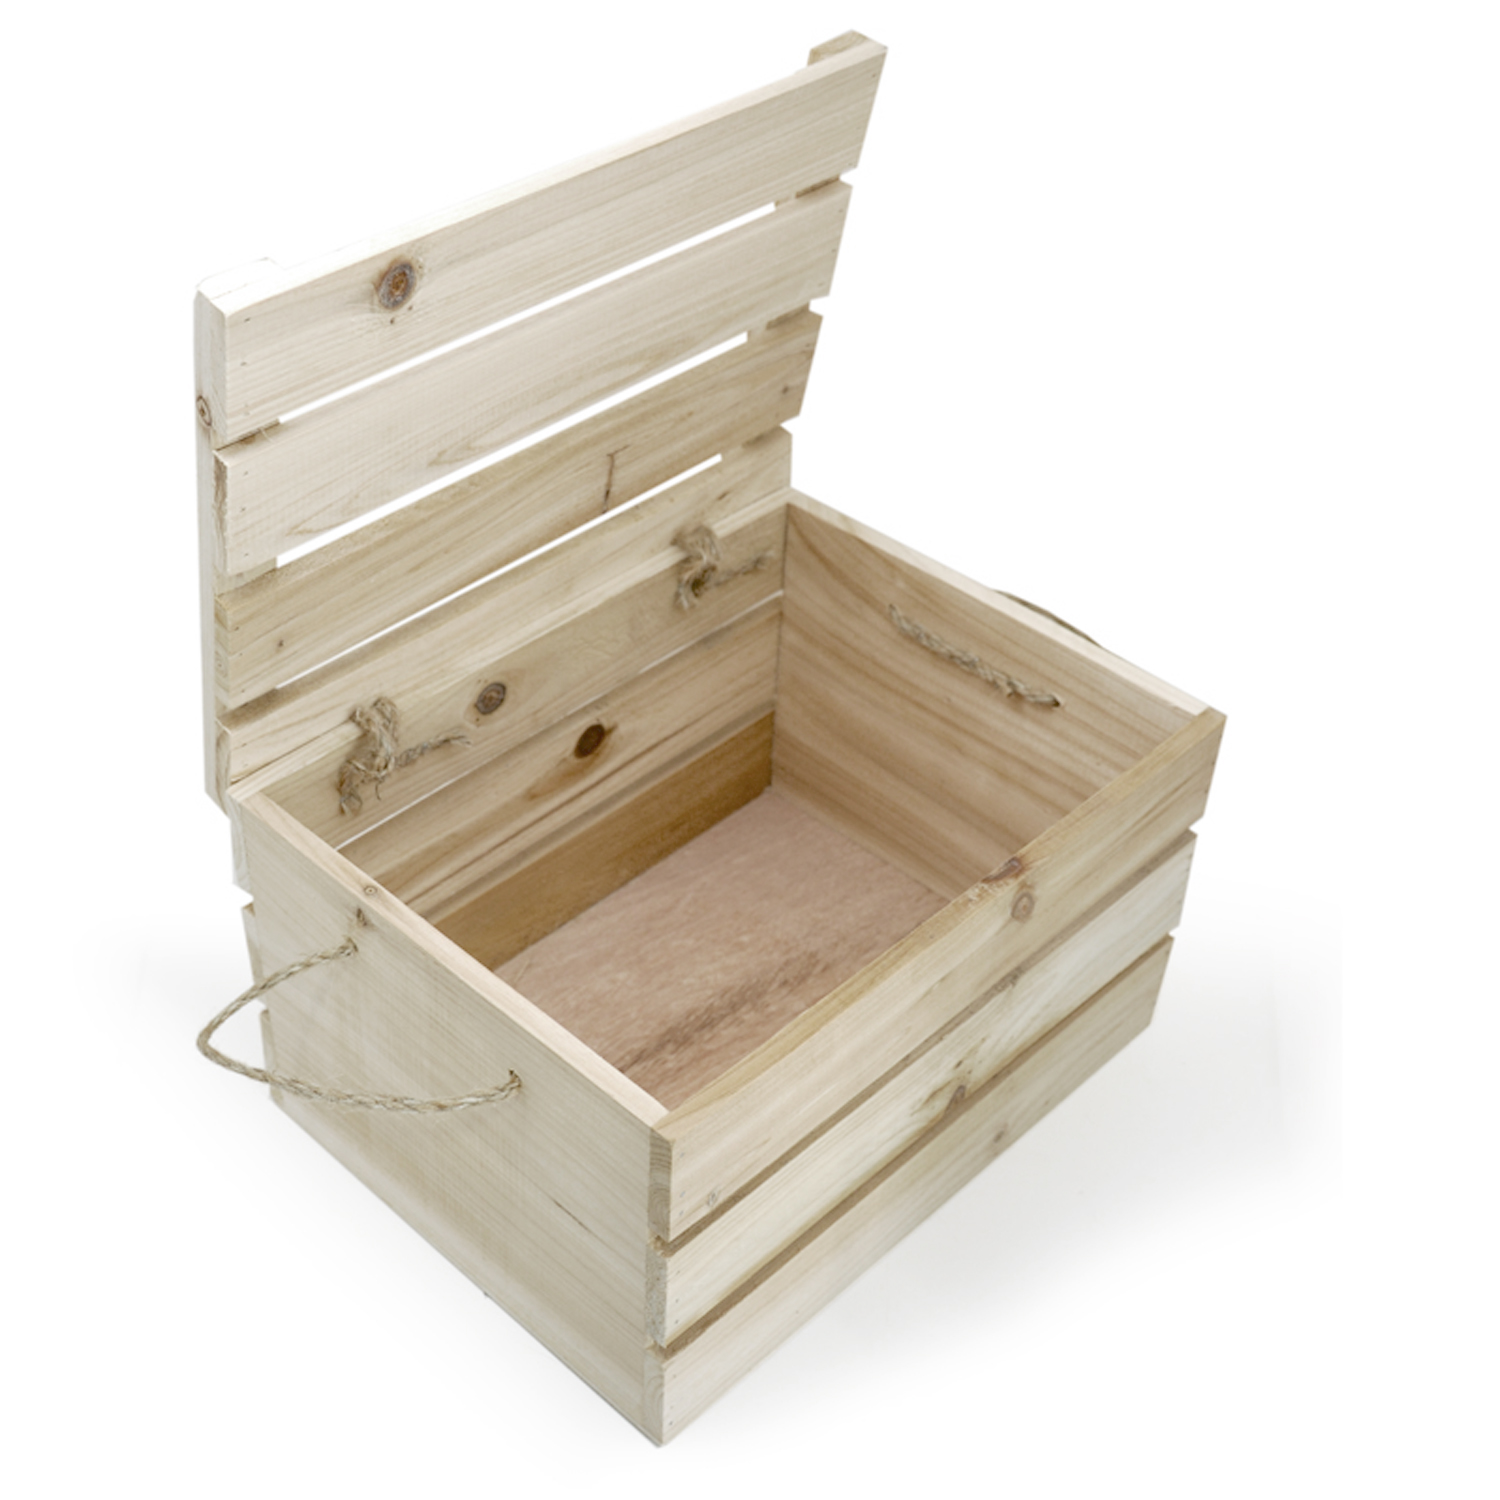 Natural Wooden Storage Box with Rope Handles The Lucky Clover Trading Co.